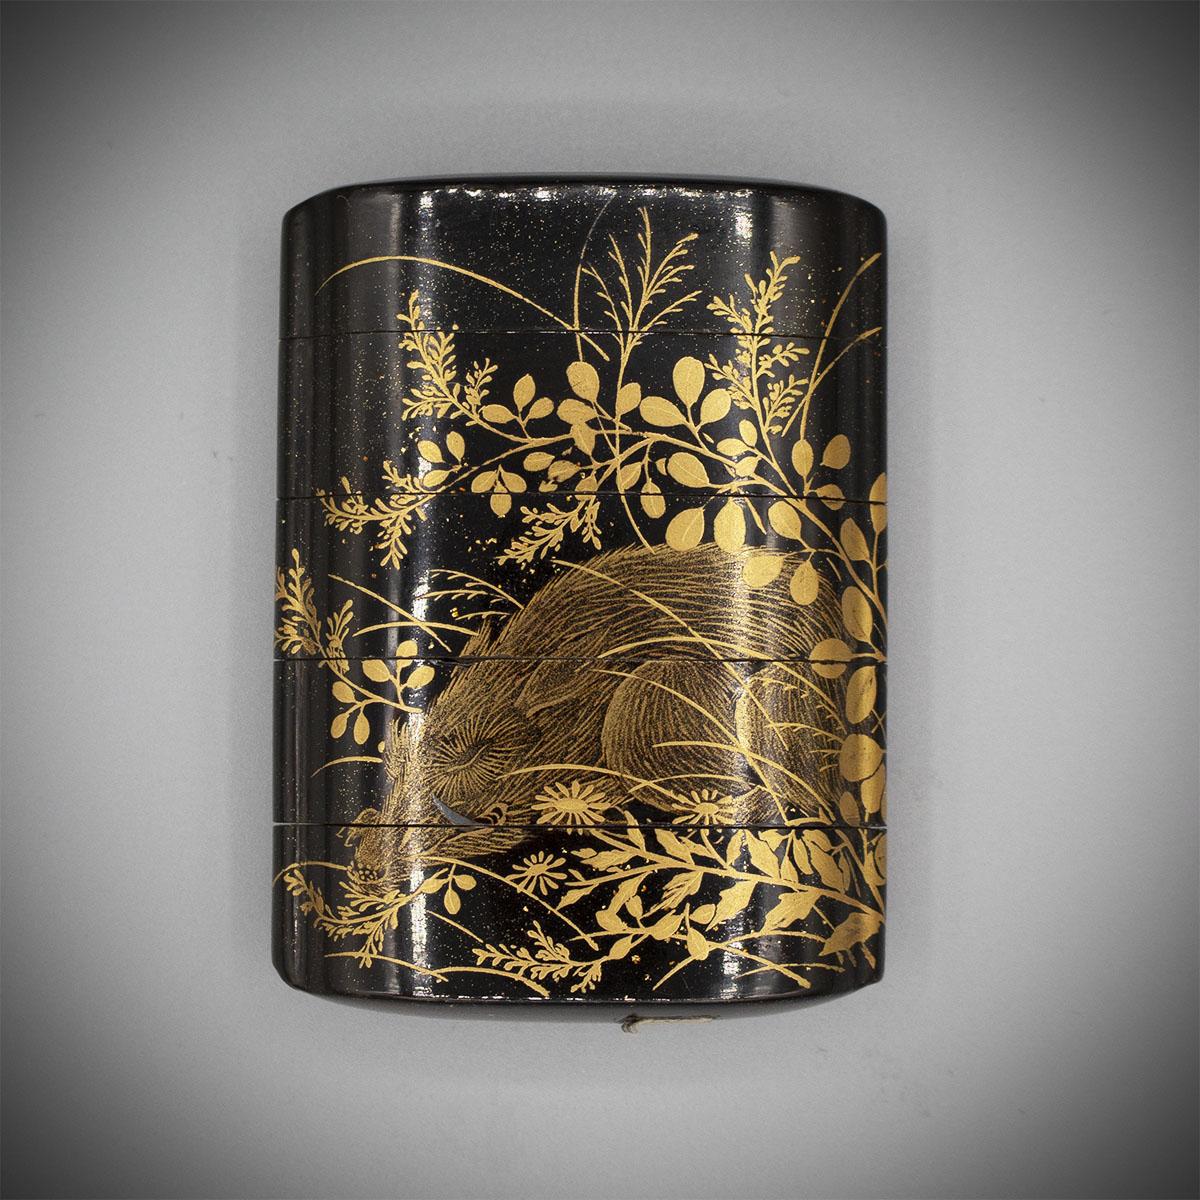 Small Four-Case Roiro Lacquer Inro with a Sleeping Boar by Shunsho